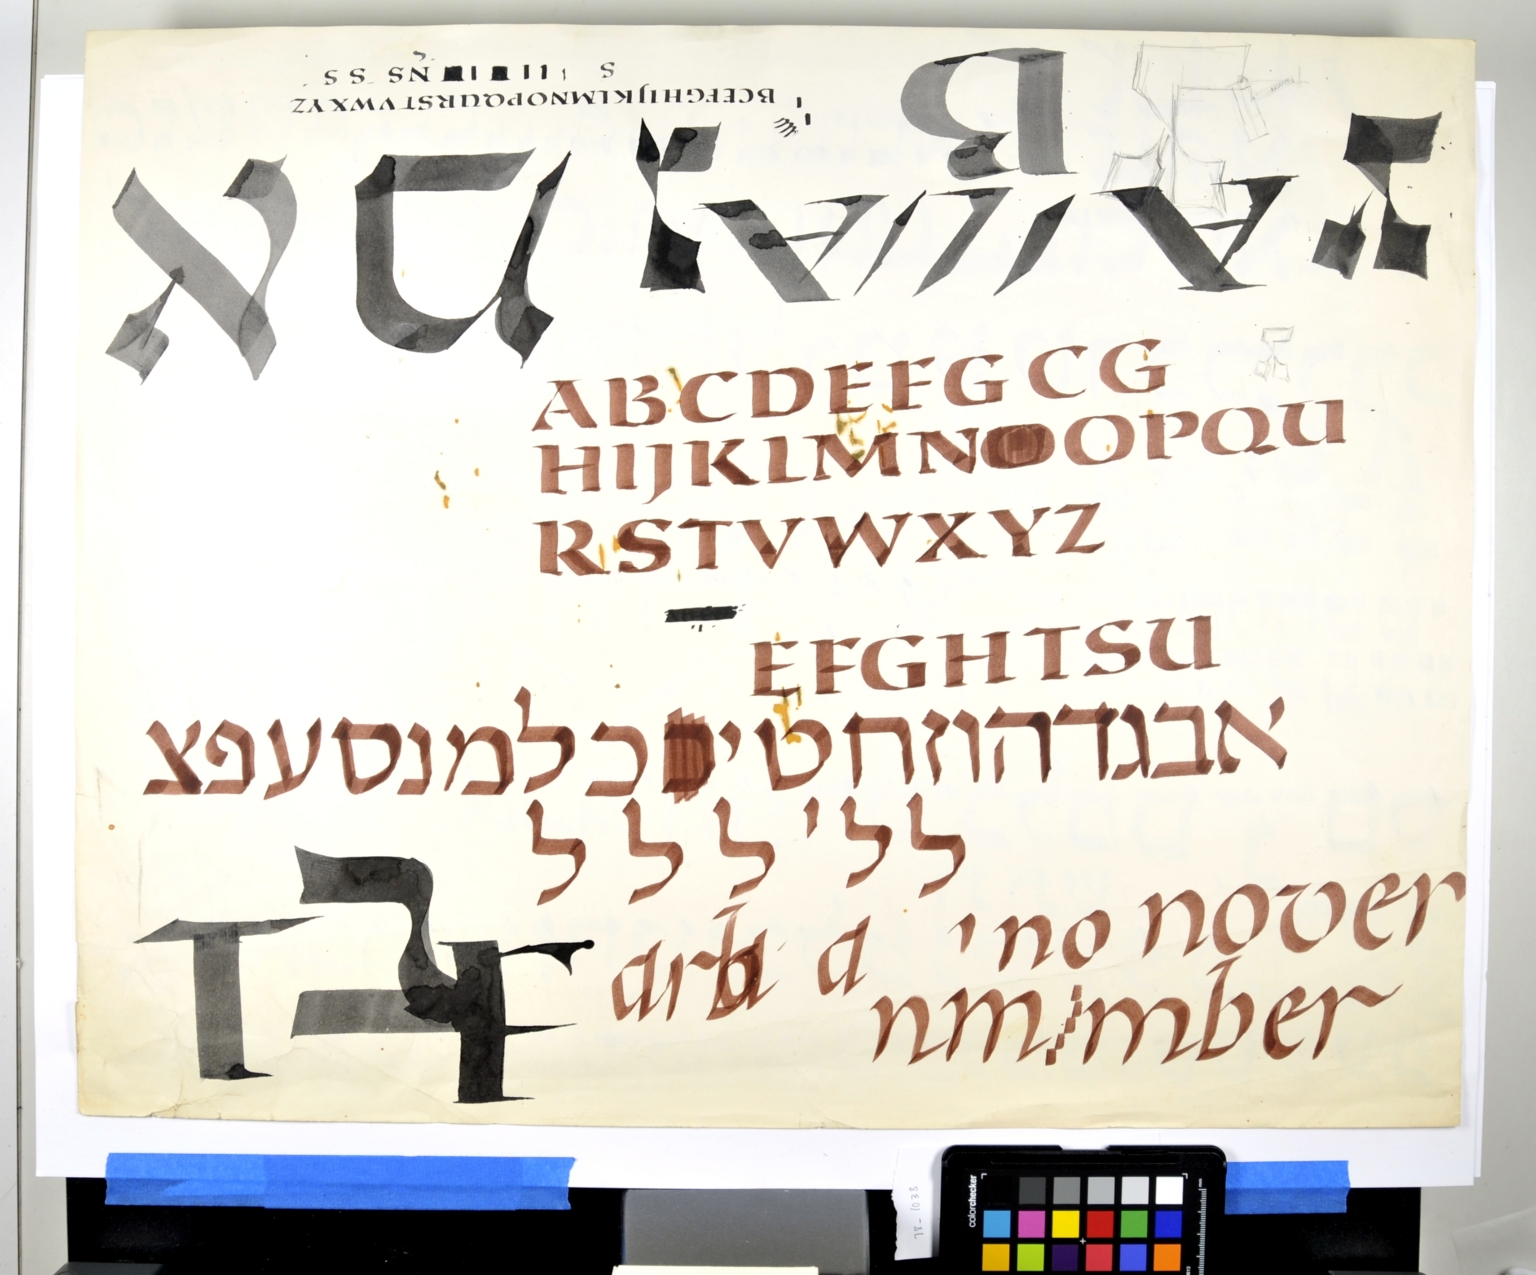 Hebrew and Latin alphabet lettering in brown and black ink and pencil.